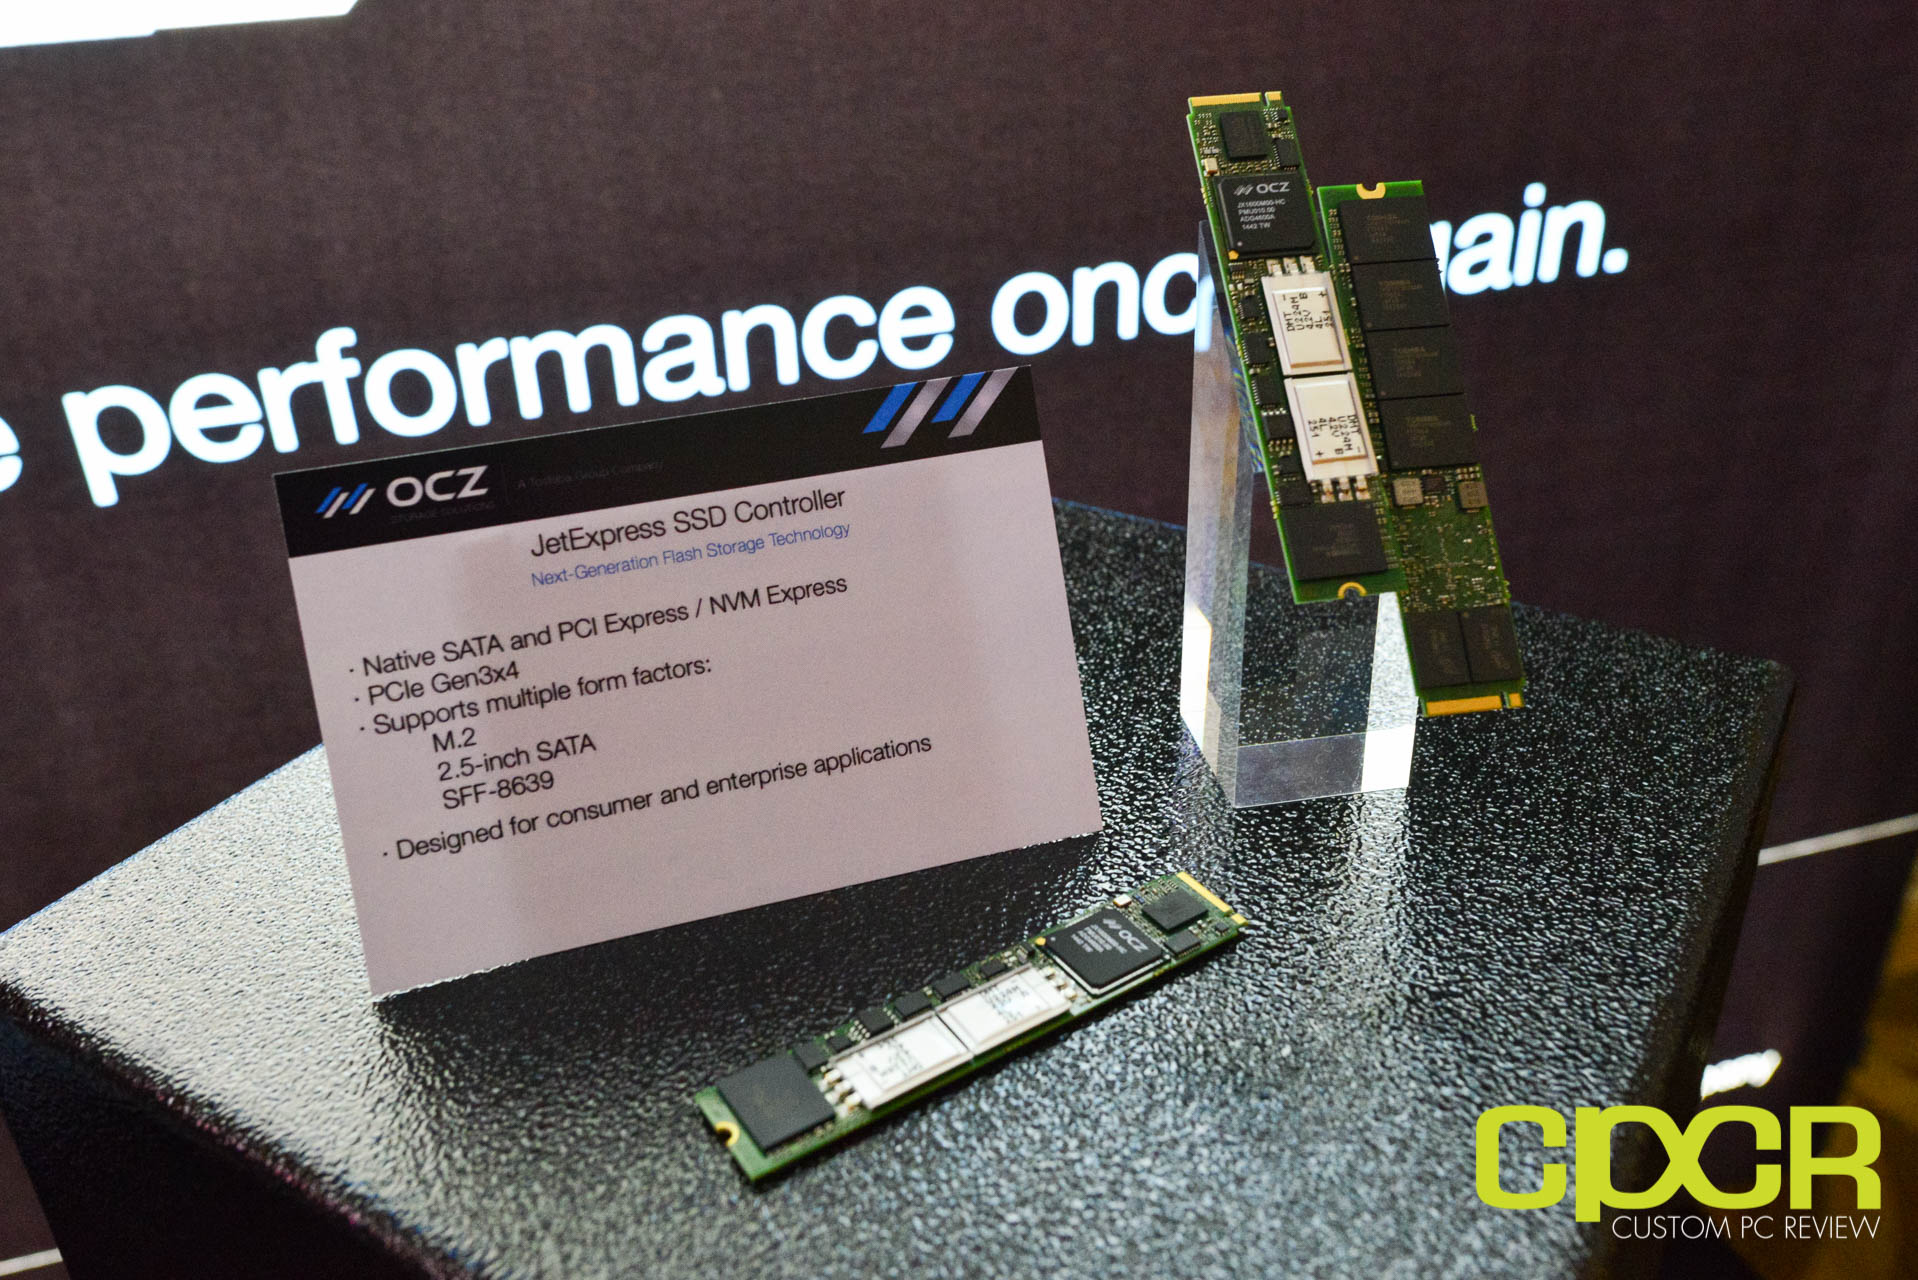 CES 2015: OCZ Reveals New JetExpress SSD Controller, Expects to Ship 1H2015